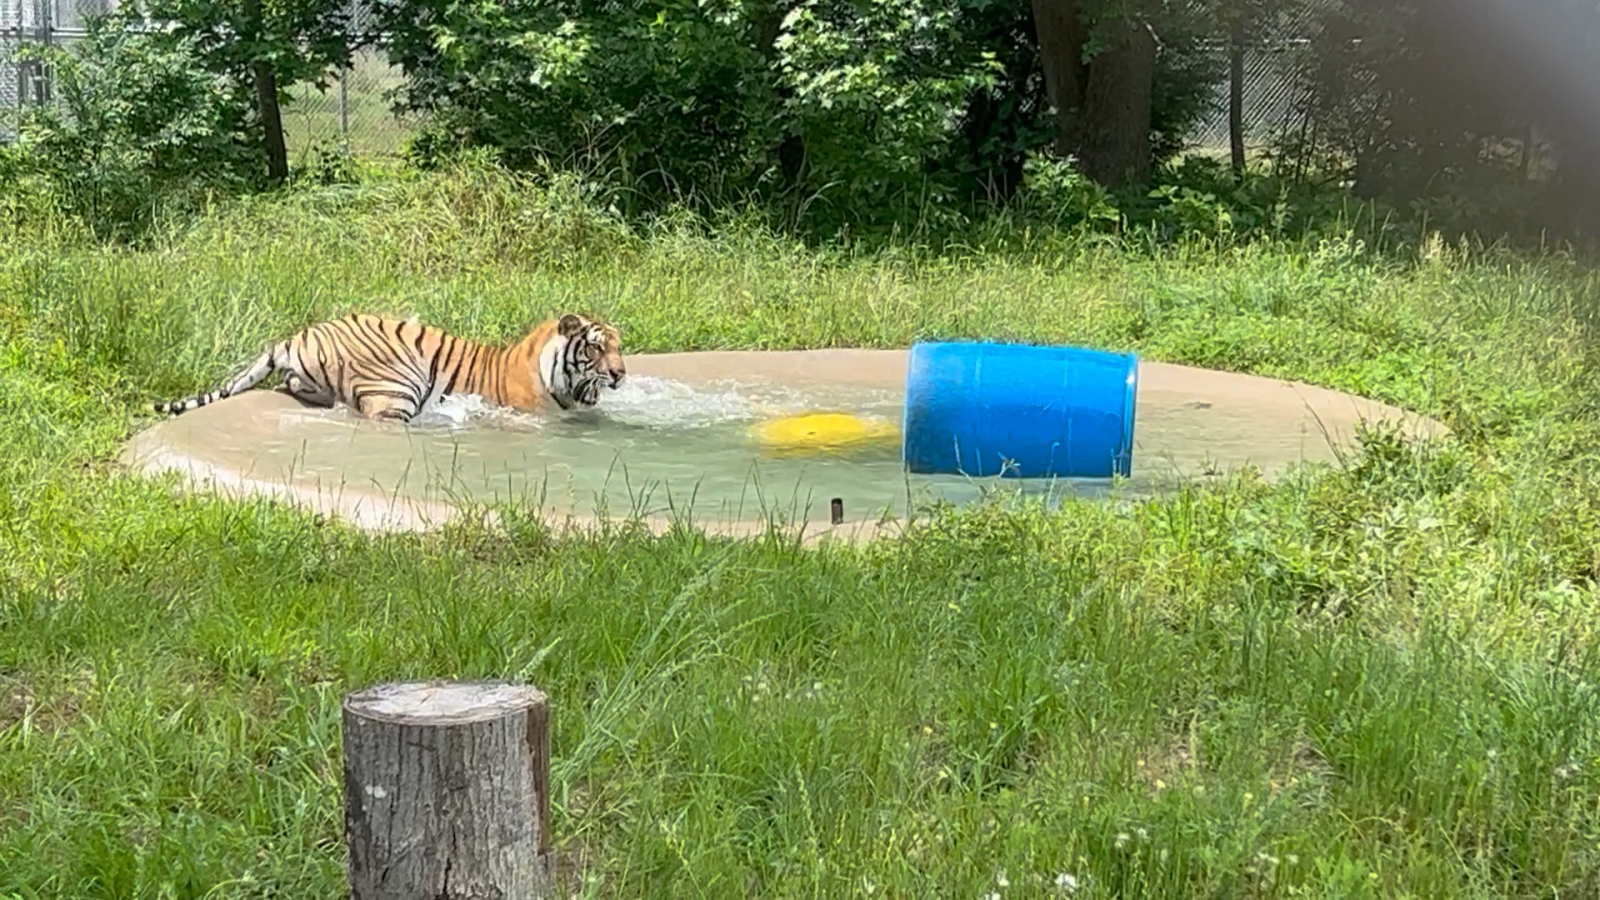 Tiger playing in a pool